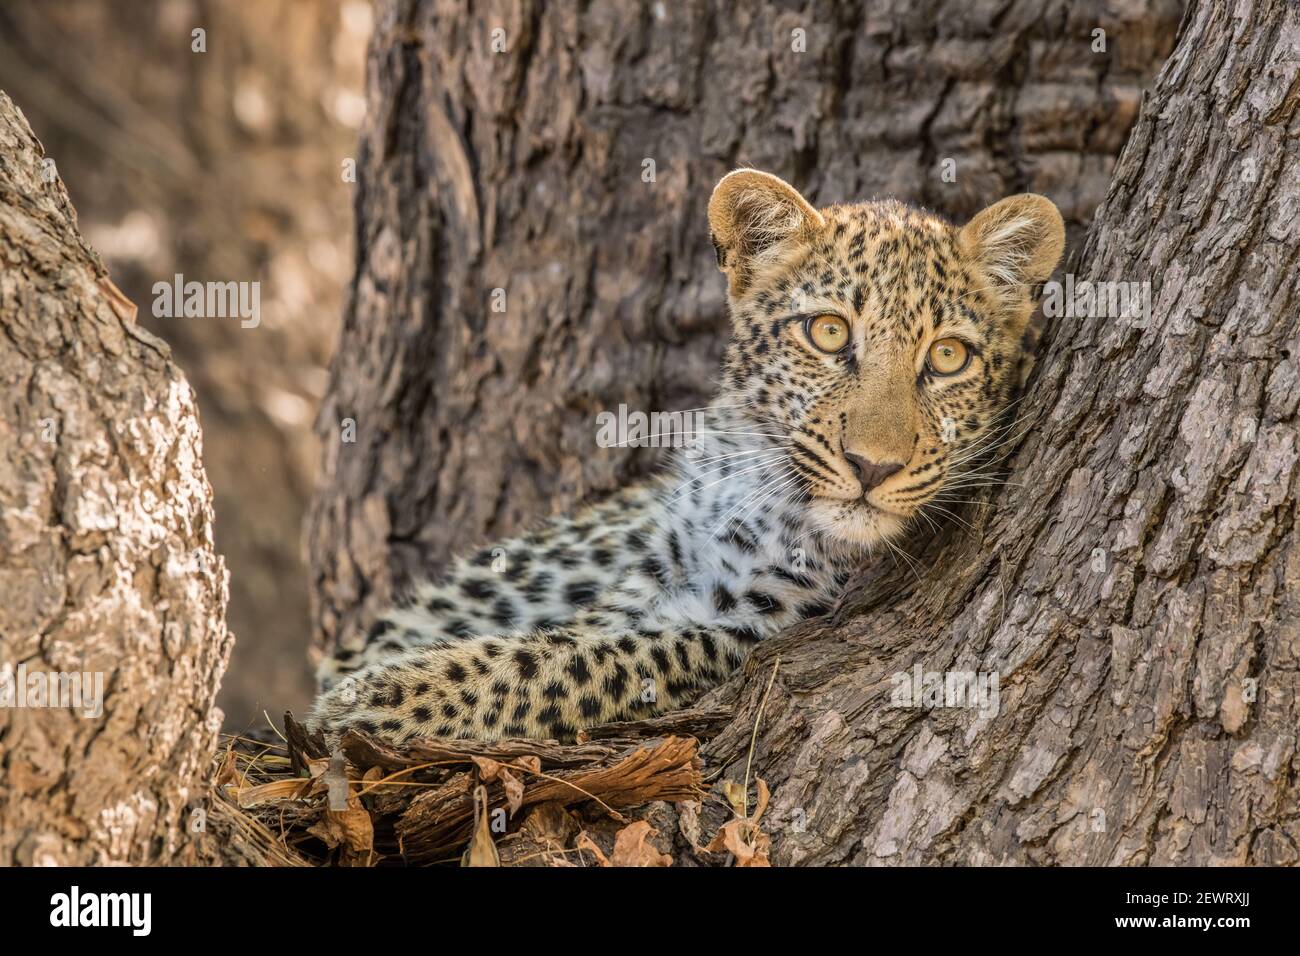 Young leopard (Panthera pardus) peering out from a tree, South Luangwa National Park, Zambia, Africa Stock Photo